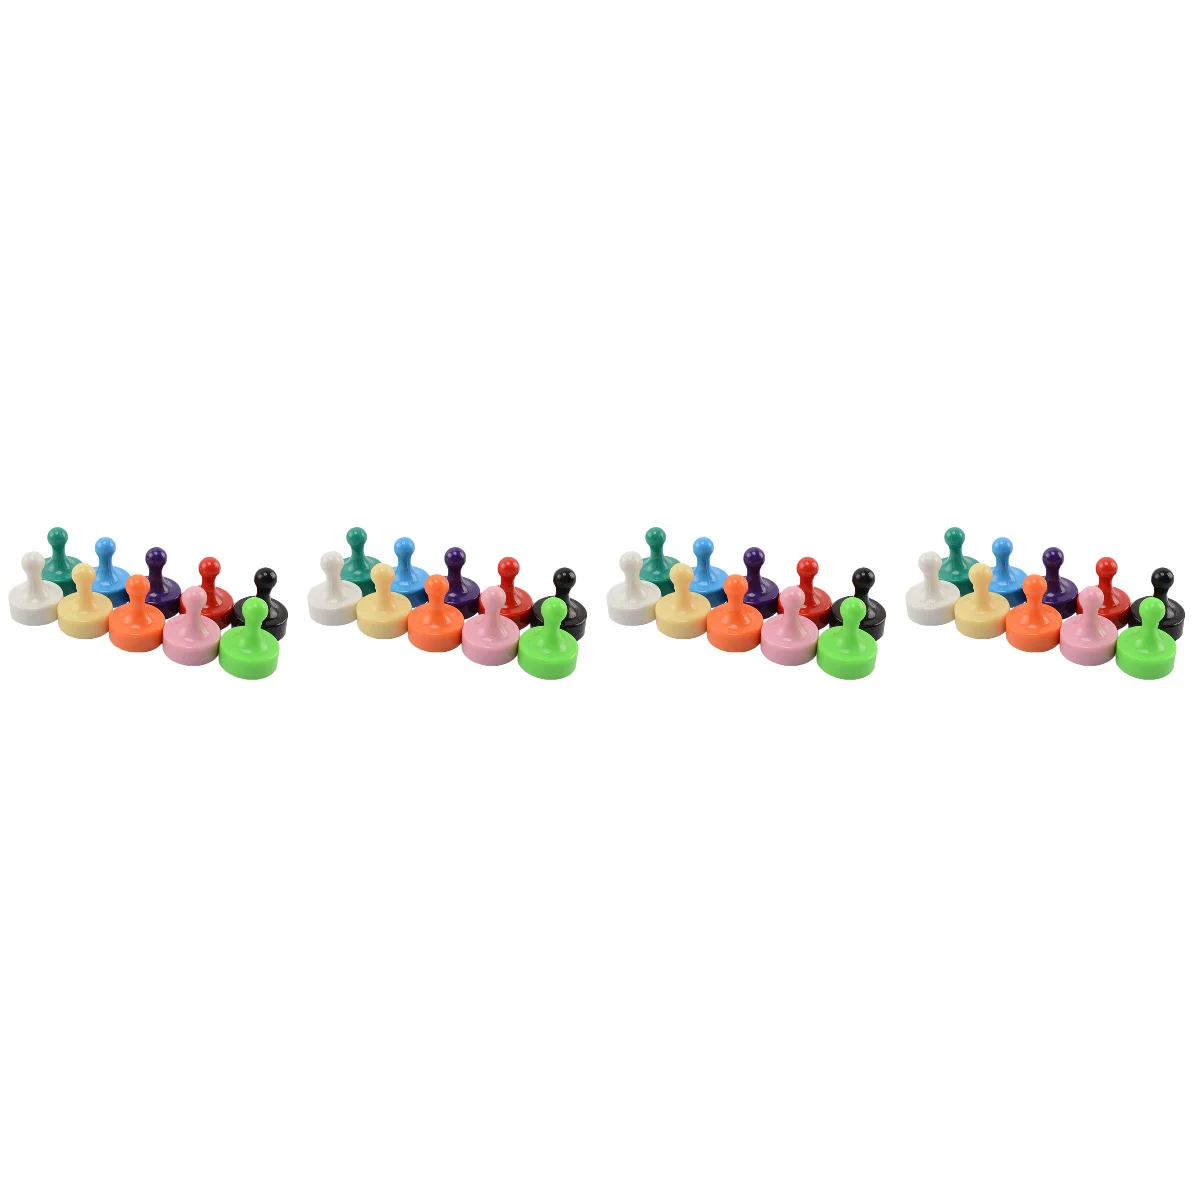 

40 Pcs Push Pin Magnets Small Fridge Magnets for Whiteboard Map Refrigerator Classroom